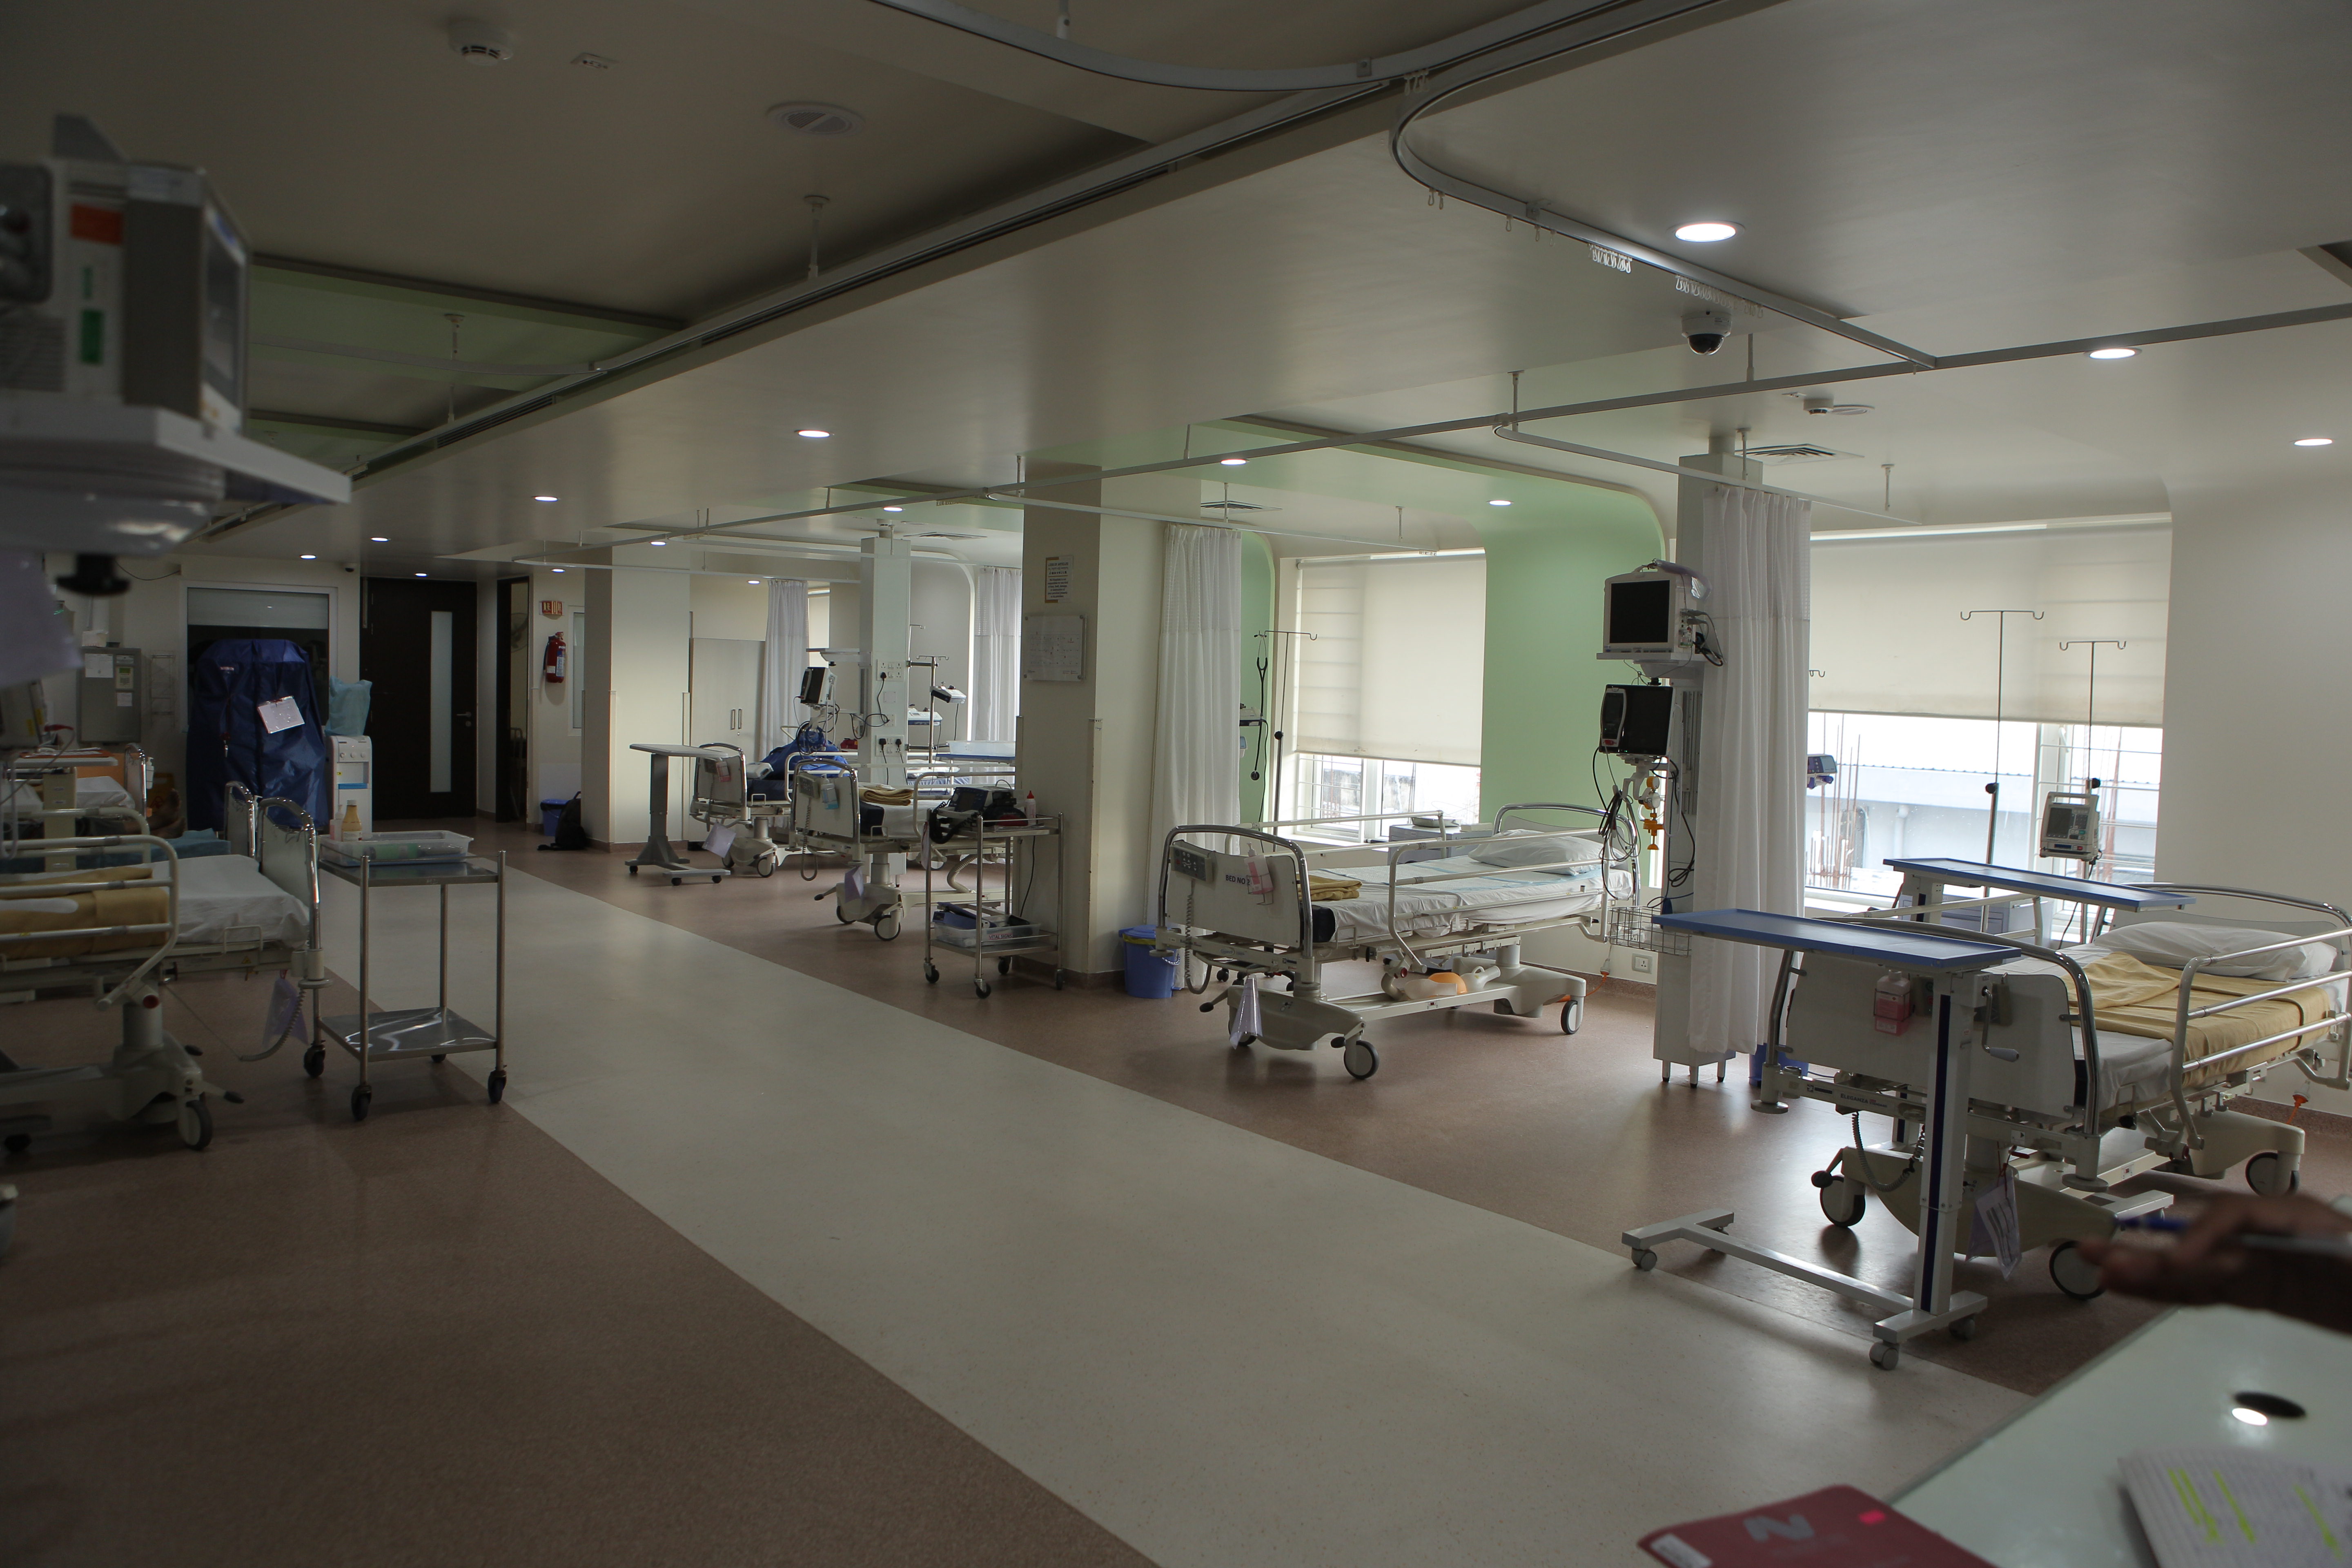 A First-hand Look at the ICUs Life-saving Technologies